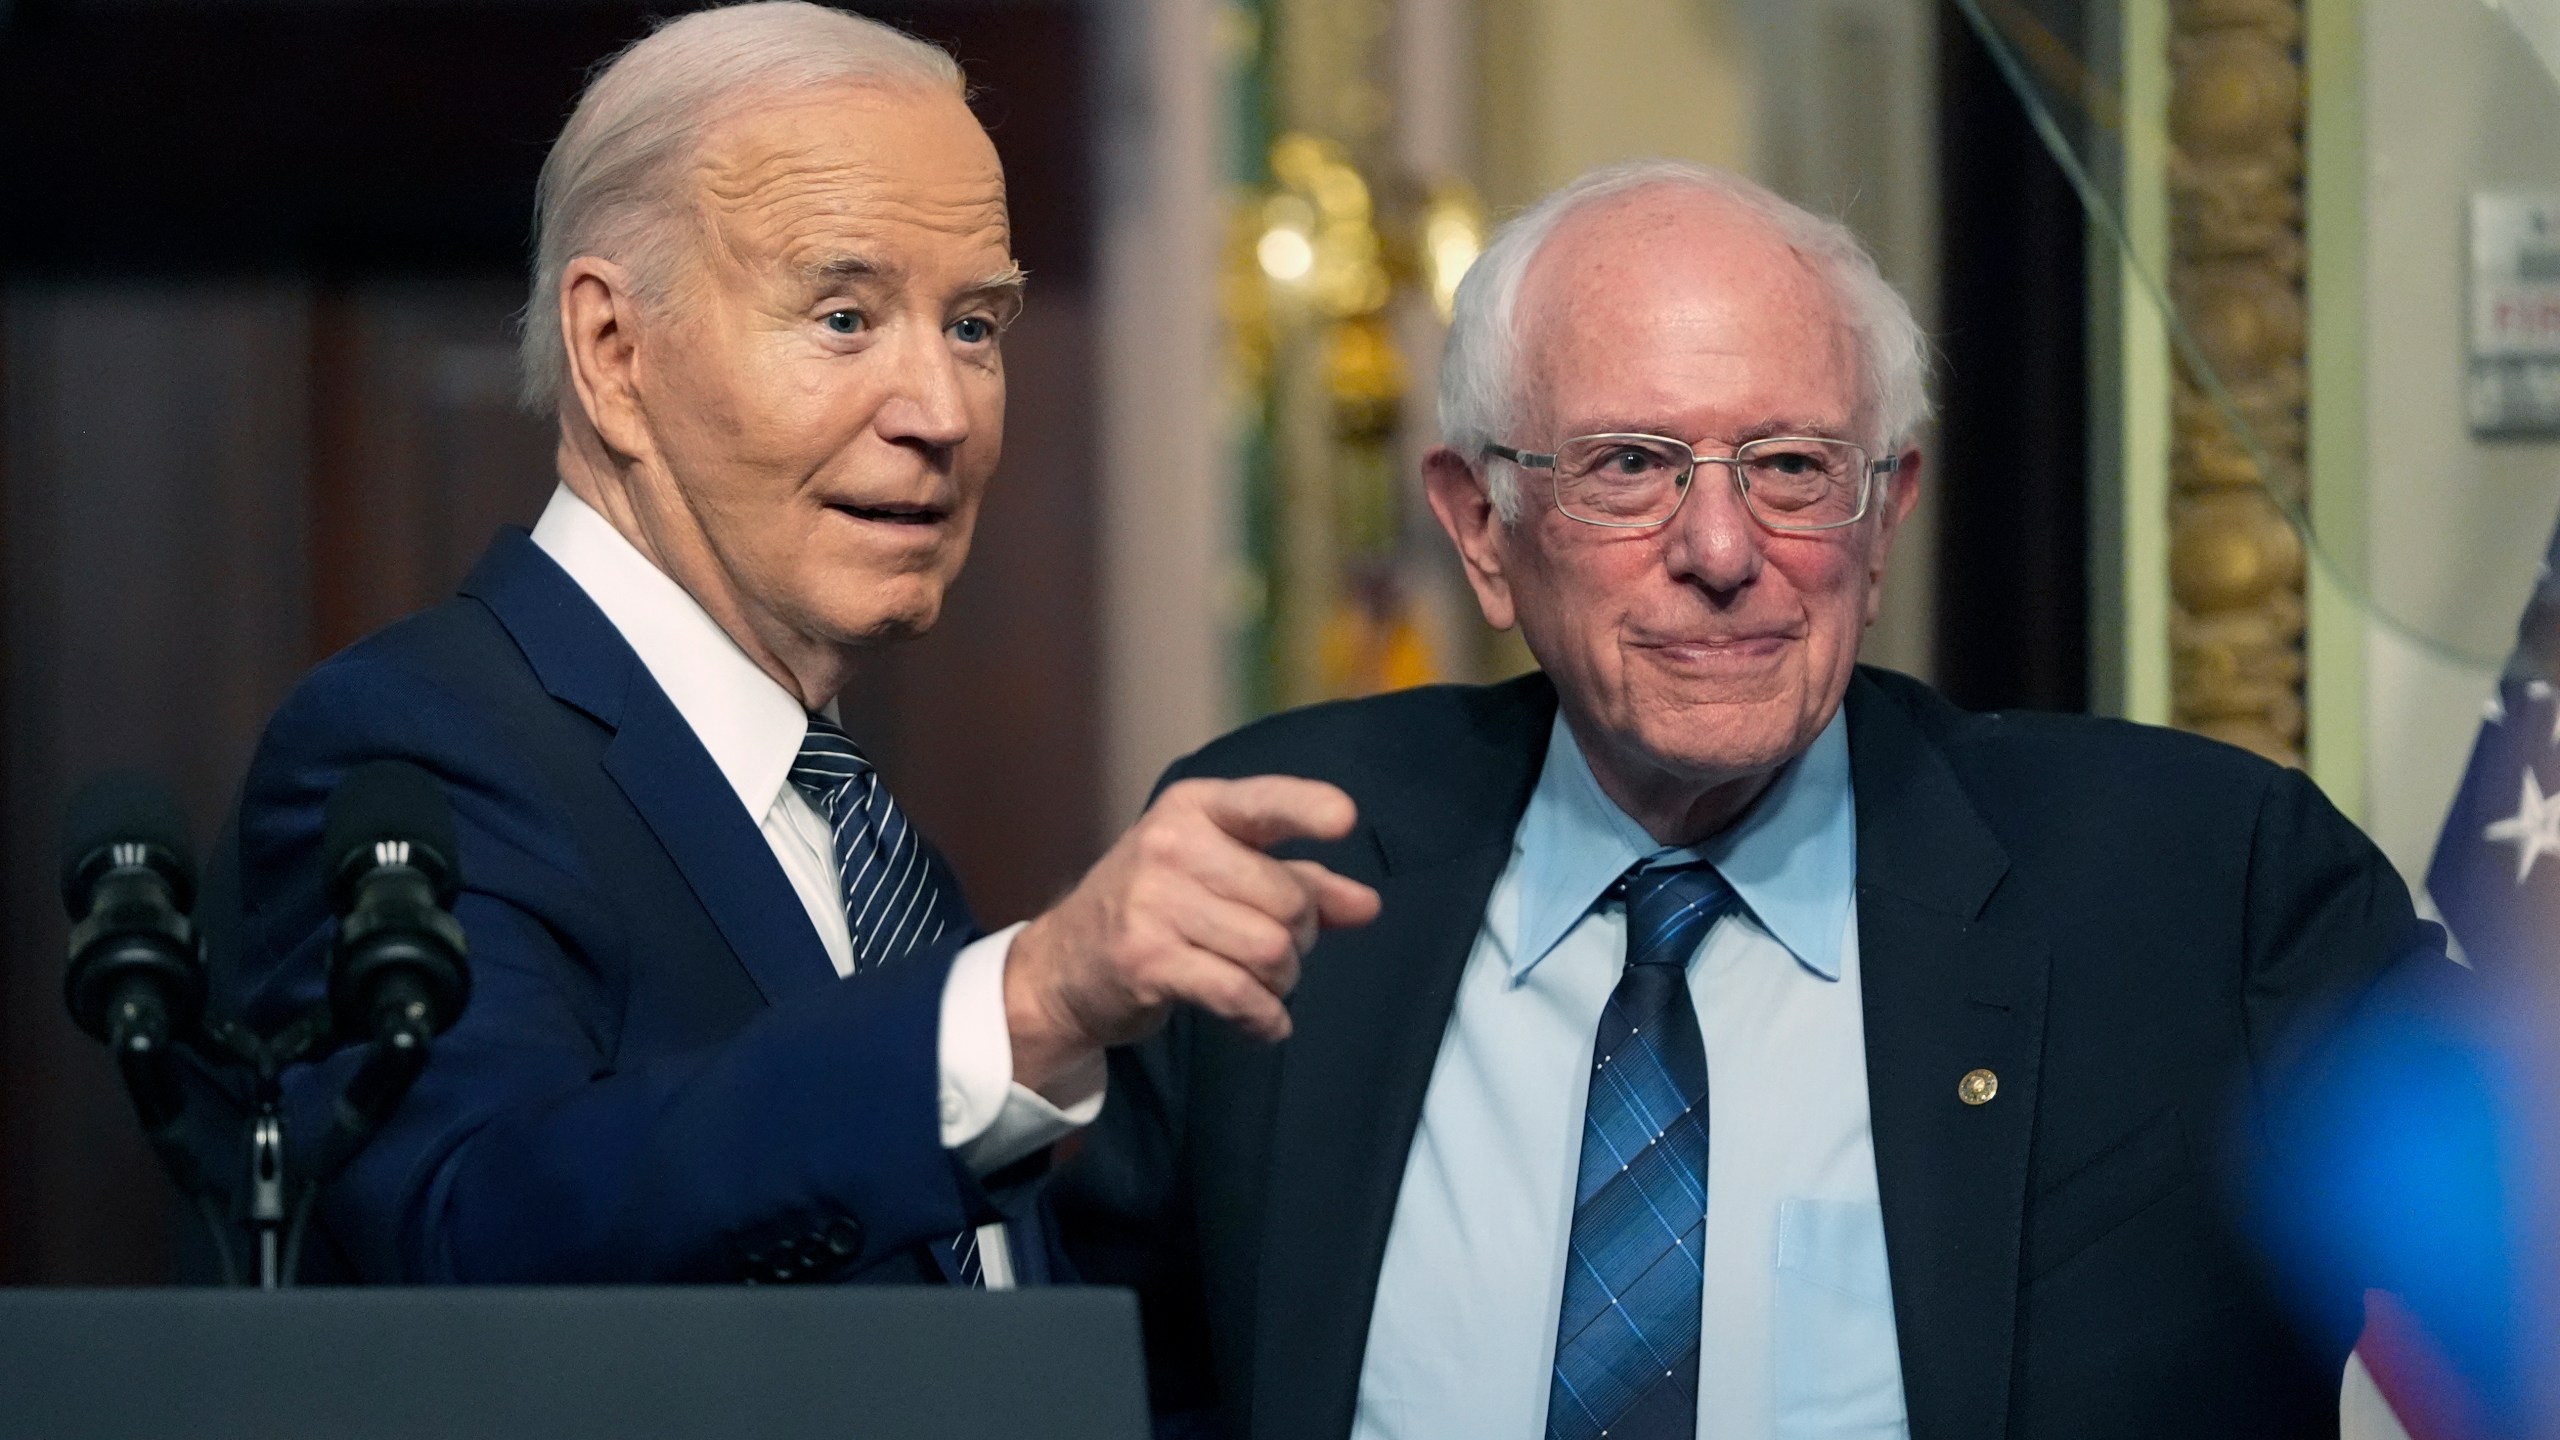 President Joe Biden stands with Sen. Bernie Sanders, I-Vt., after speaking about lowering health care costs in the Indian Treaty Room at the Eisenhower Executive Office Building on the White House complex in Washington, Wednesday, April 3, 2024. (AP Photo/Mark Schiefelbein)